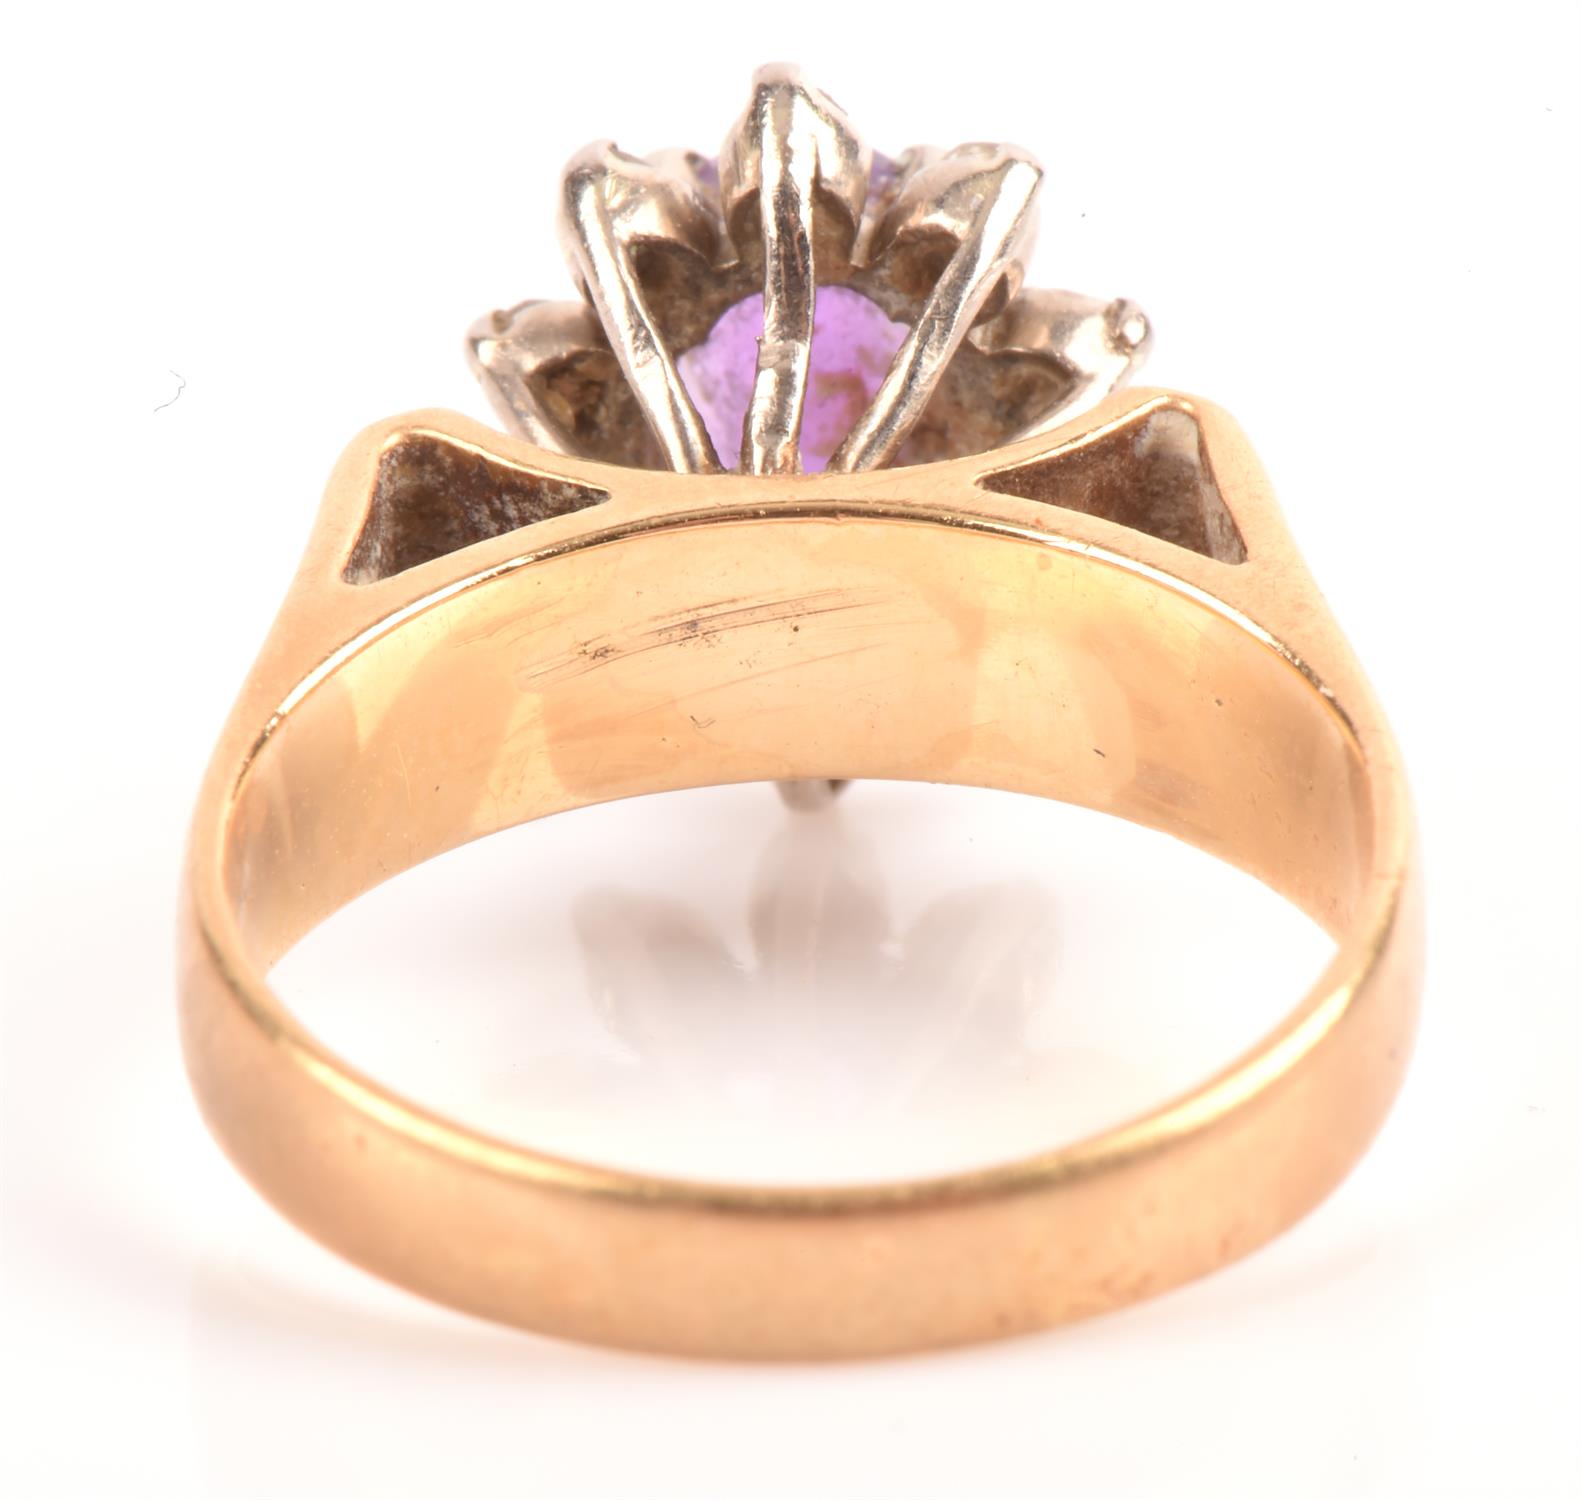 Amethyst and diamond ring, oval cut amethyst surrounded by ten single cut diamonds, - Image 4 of 5